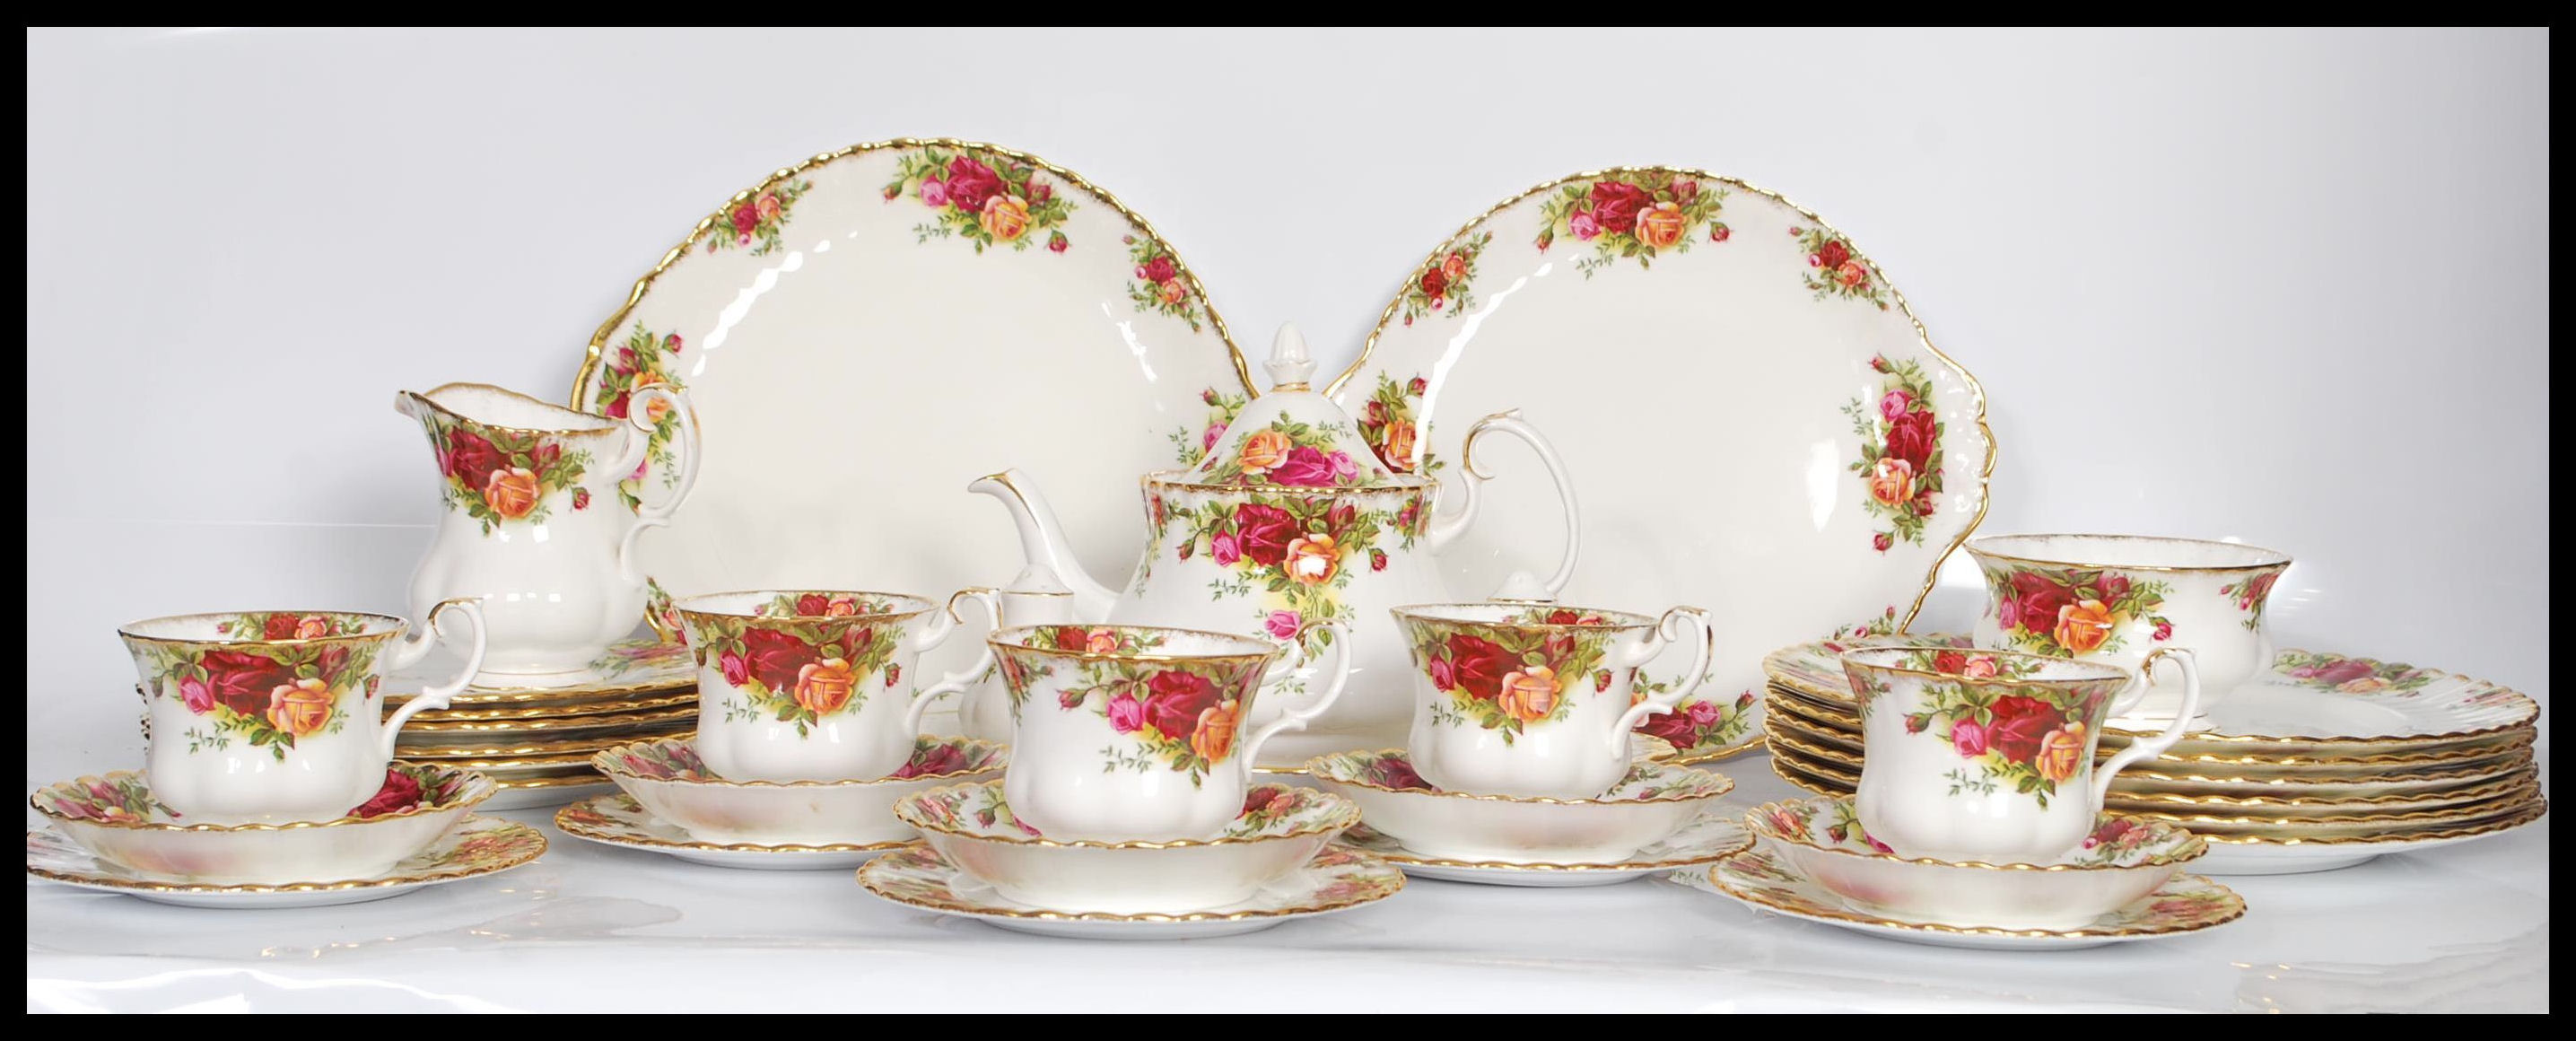 A Royal Albert bone China dinner / tea service in the Country Roses pattern. Consisting of dinner